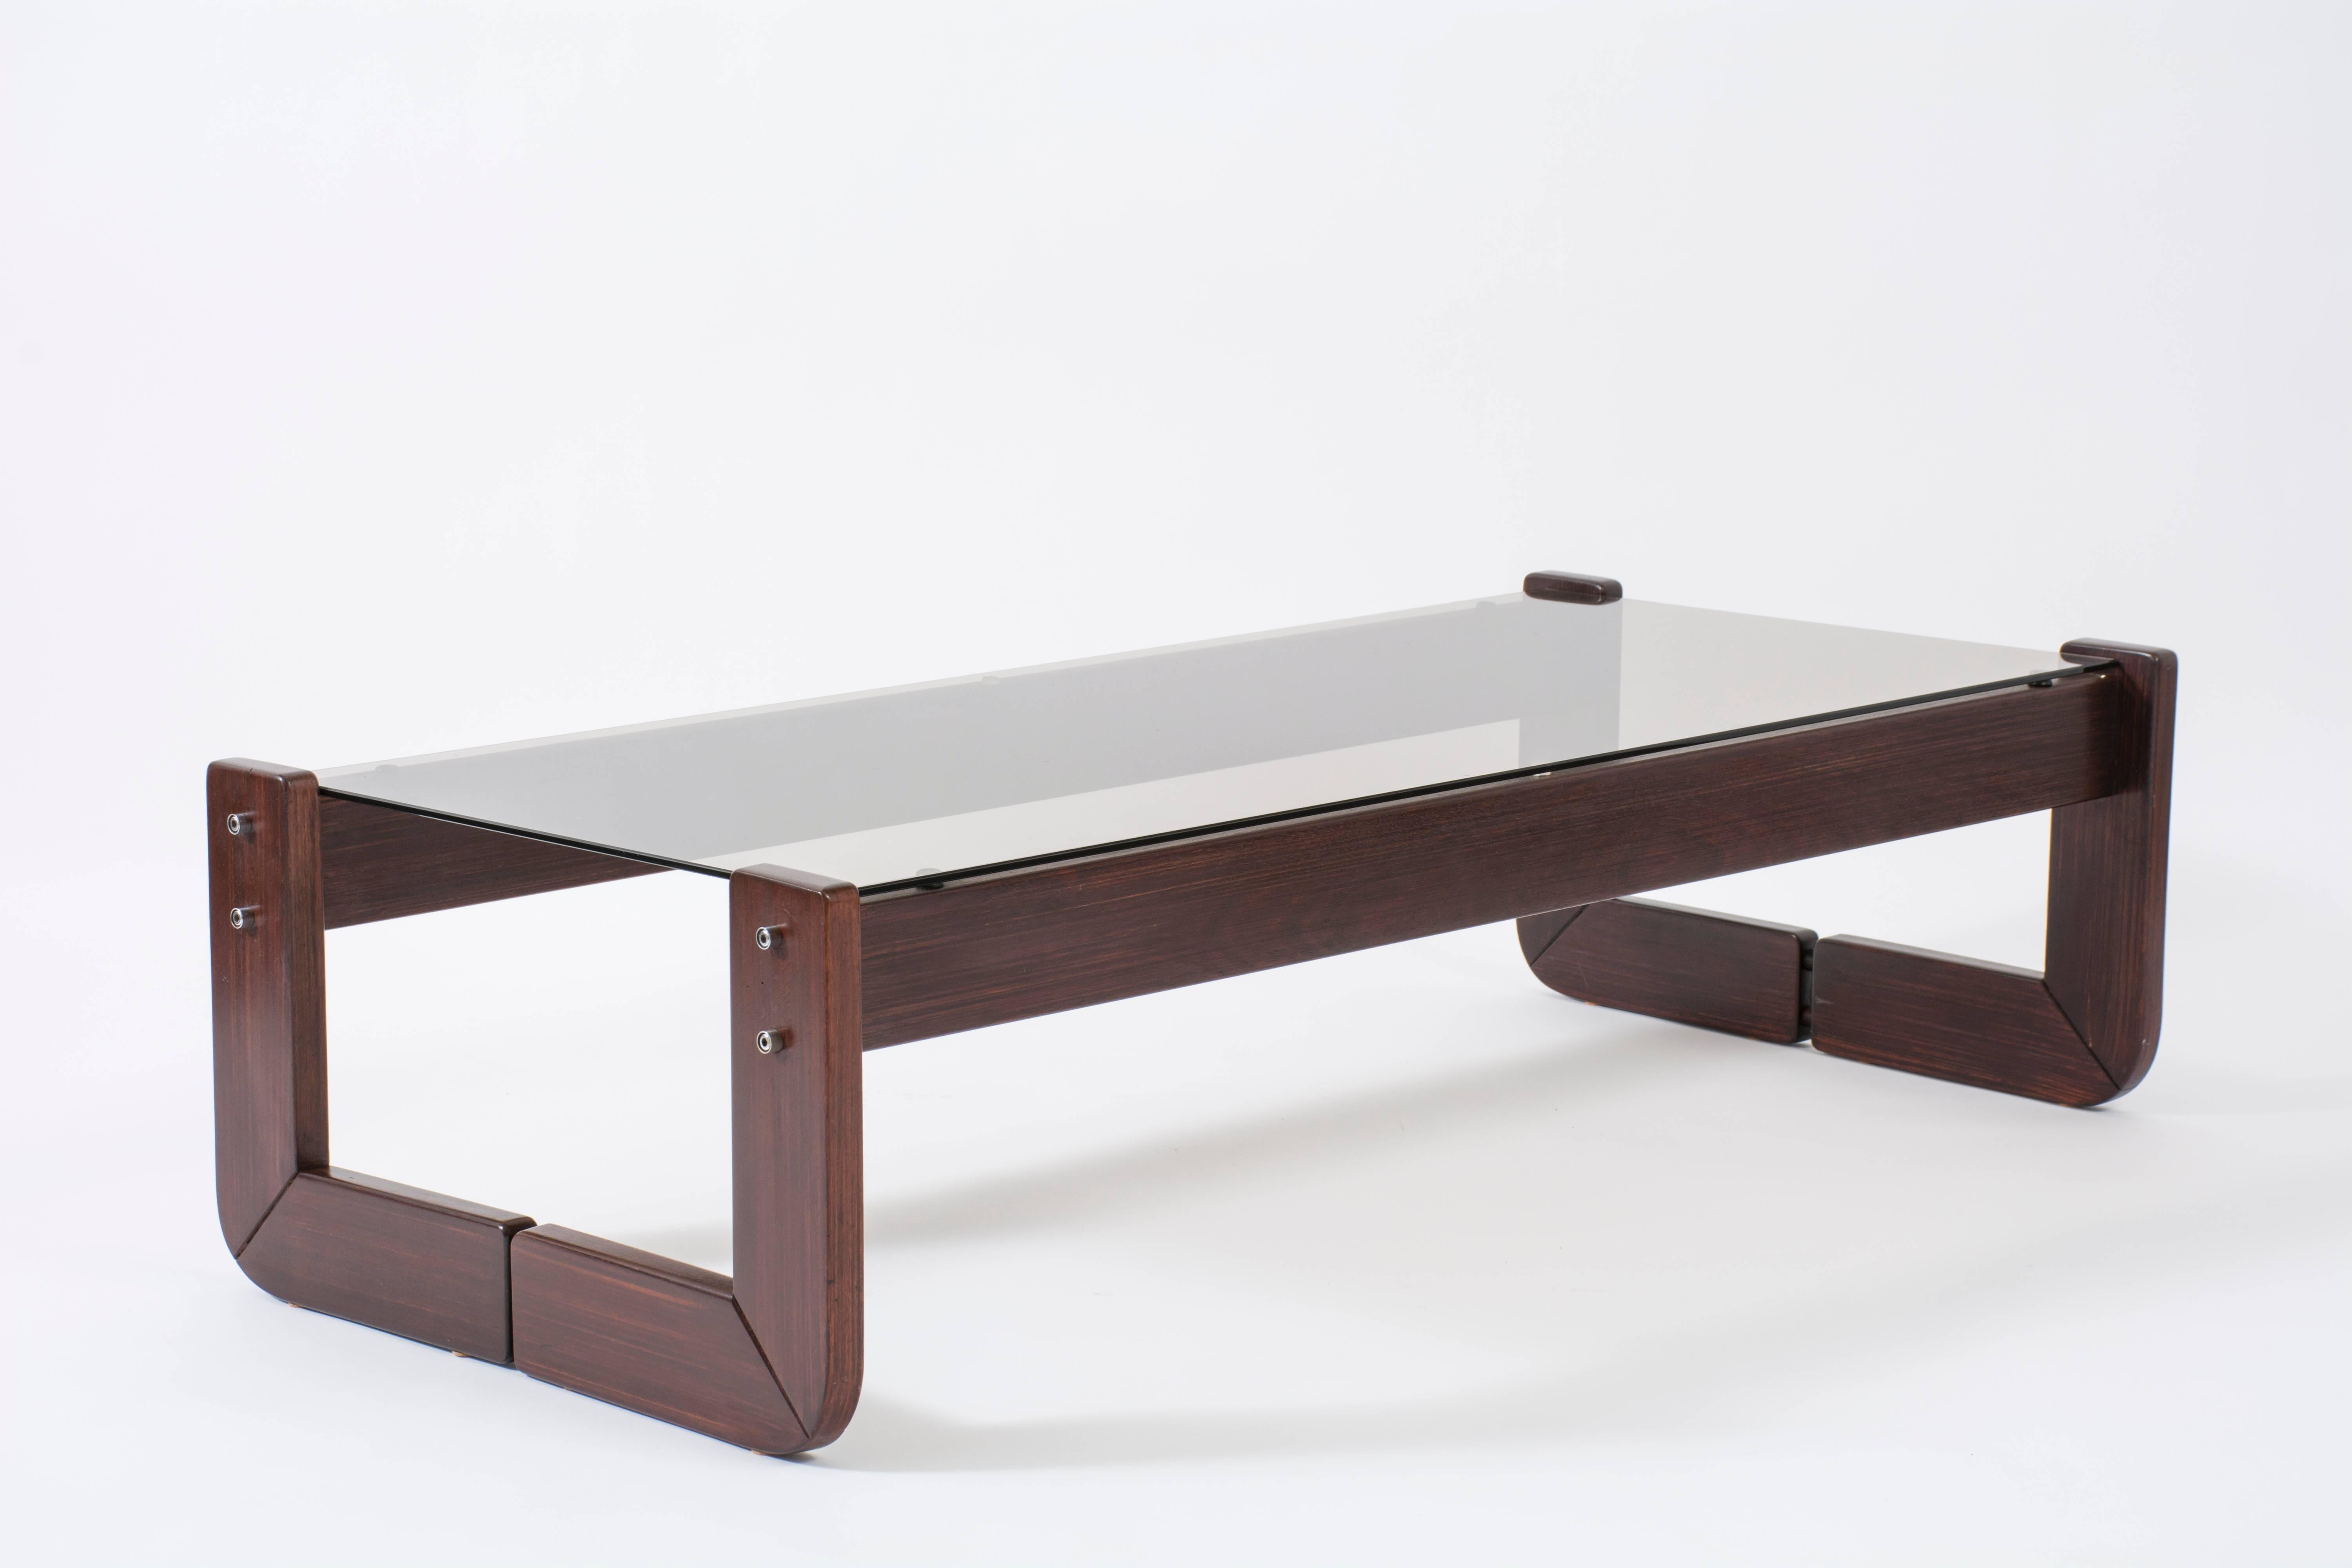 This is a rosewood and bronzed glass coffee table by Percival Lafer.  